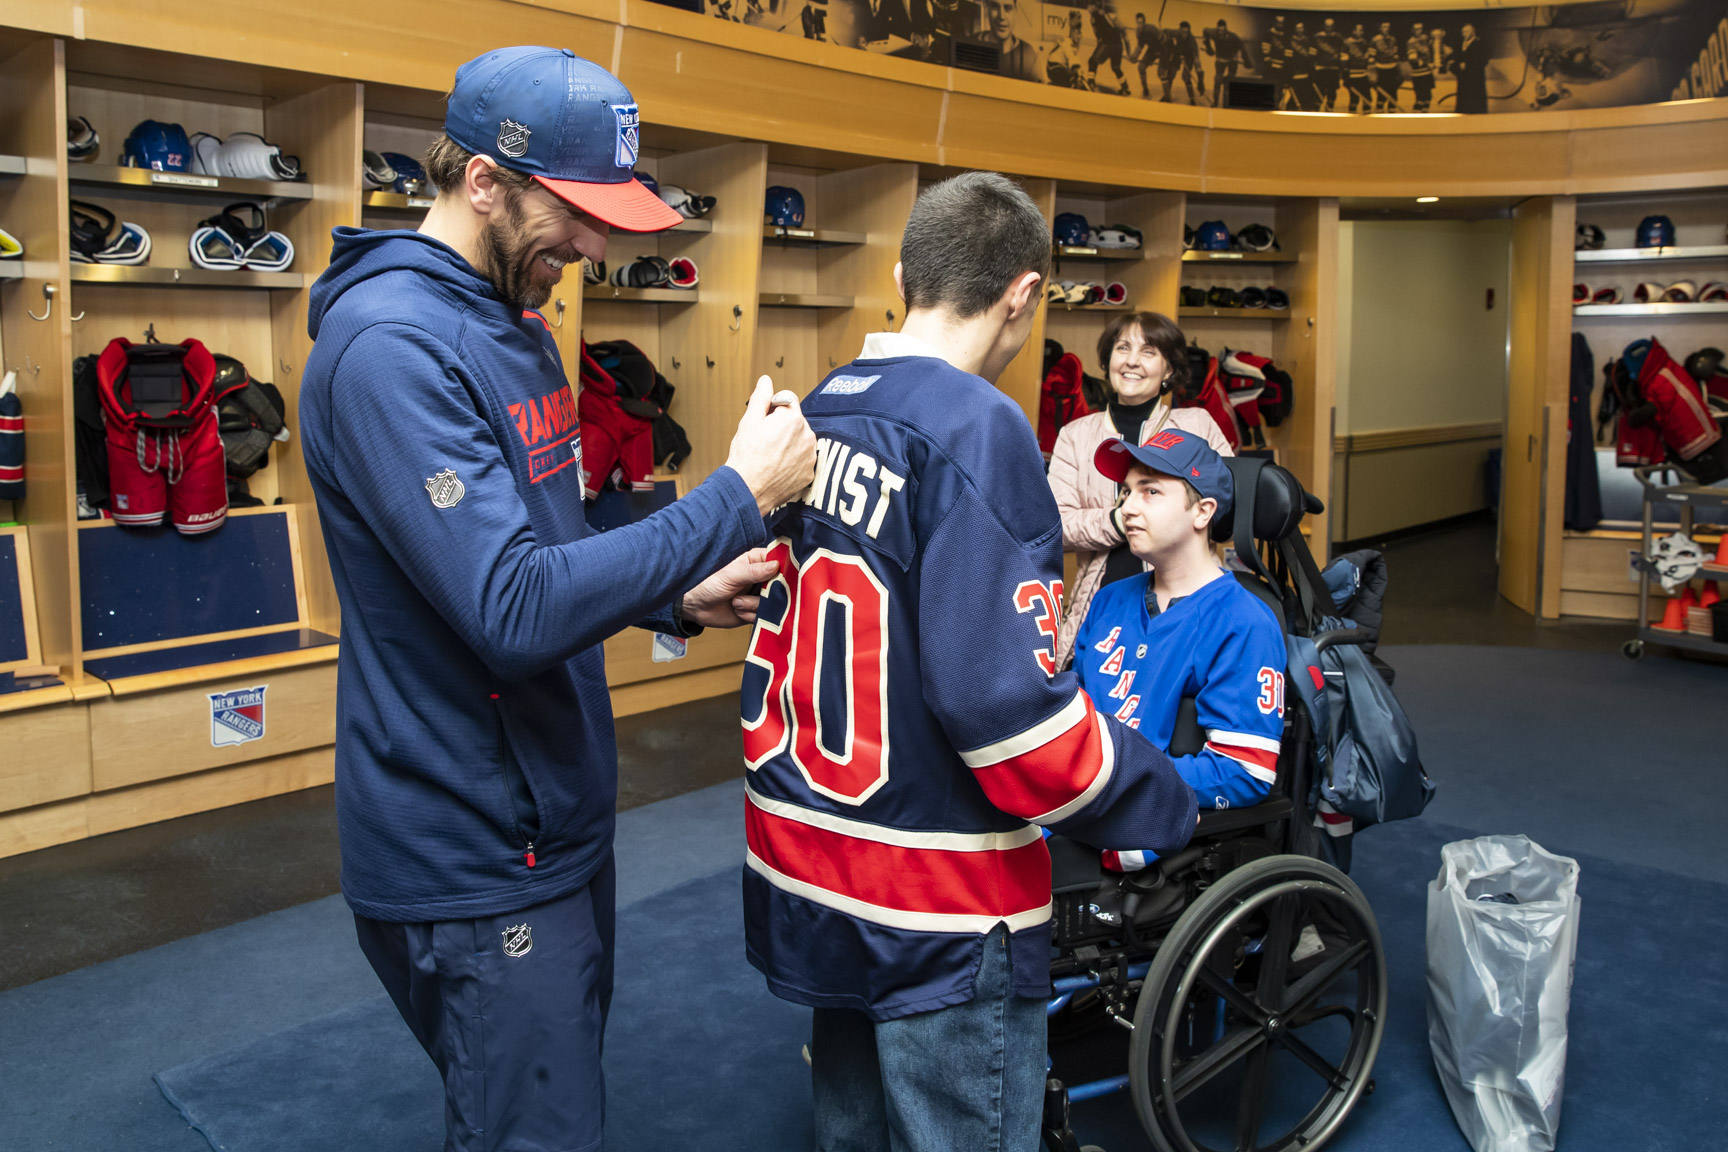 On Wednesday April 3rd 2019, Henrik had the honor to meet with Thomas and his family in the NYR locker-room post the Senators game. It was a heartwarming meeting for everyone involved and a dream come true for Thomas. Picture credit: Rebecca Taylor/MSG Photos